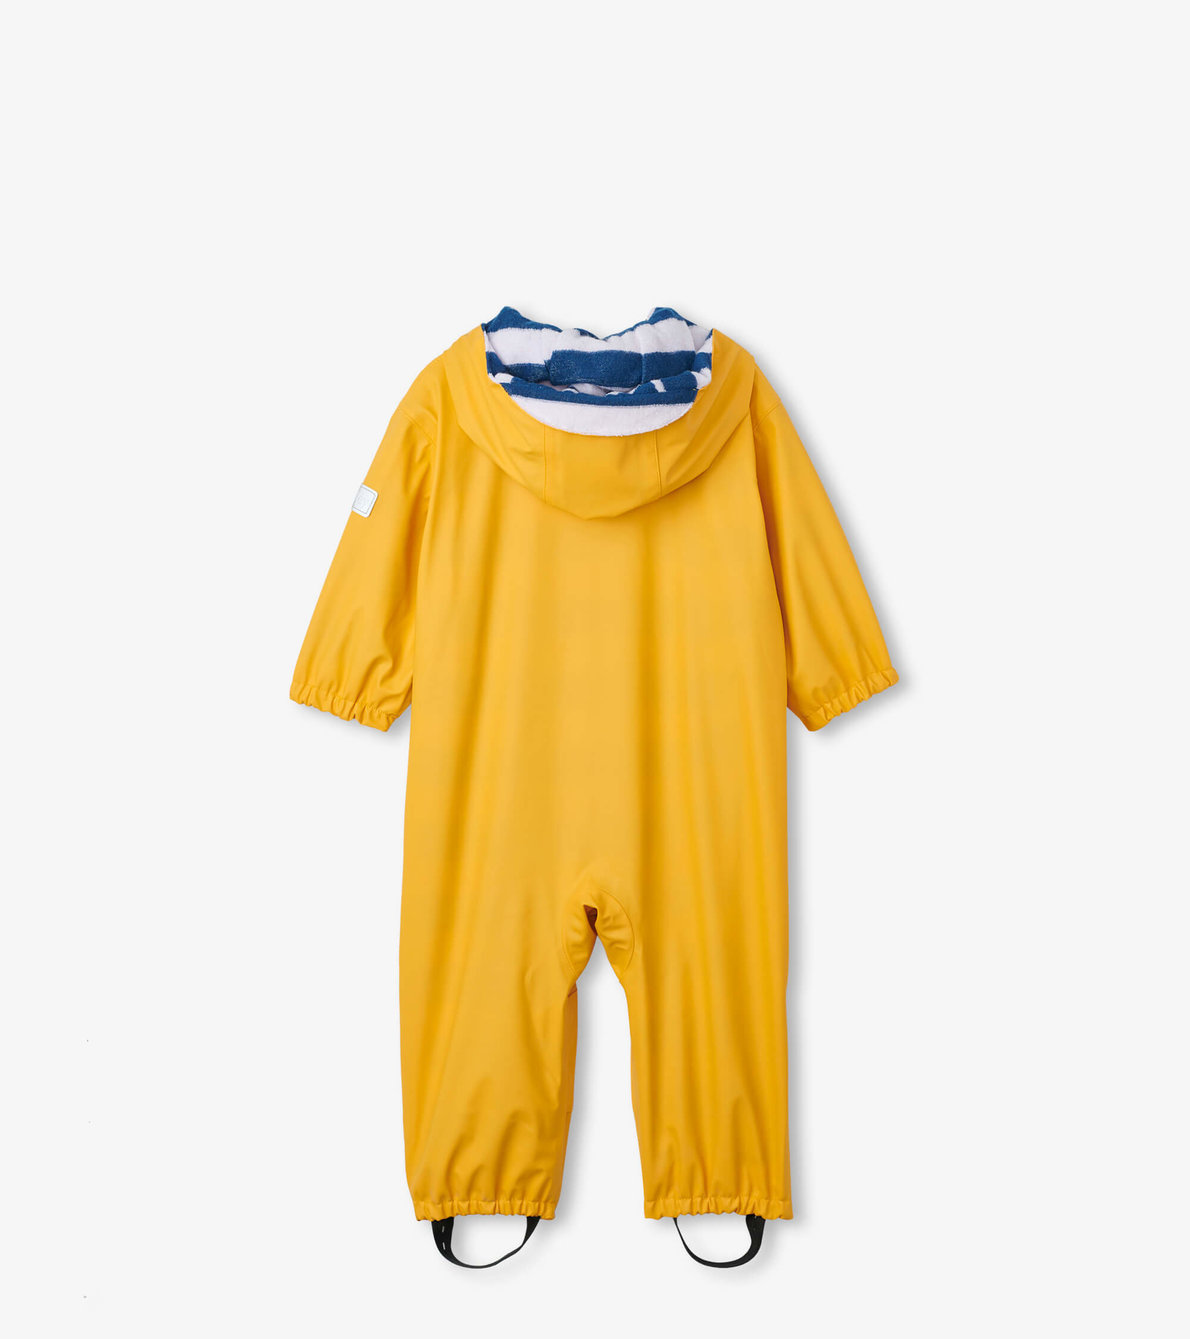 View larger image of Yellow Terry Lined Baby Rain Suit